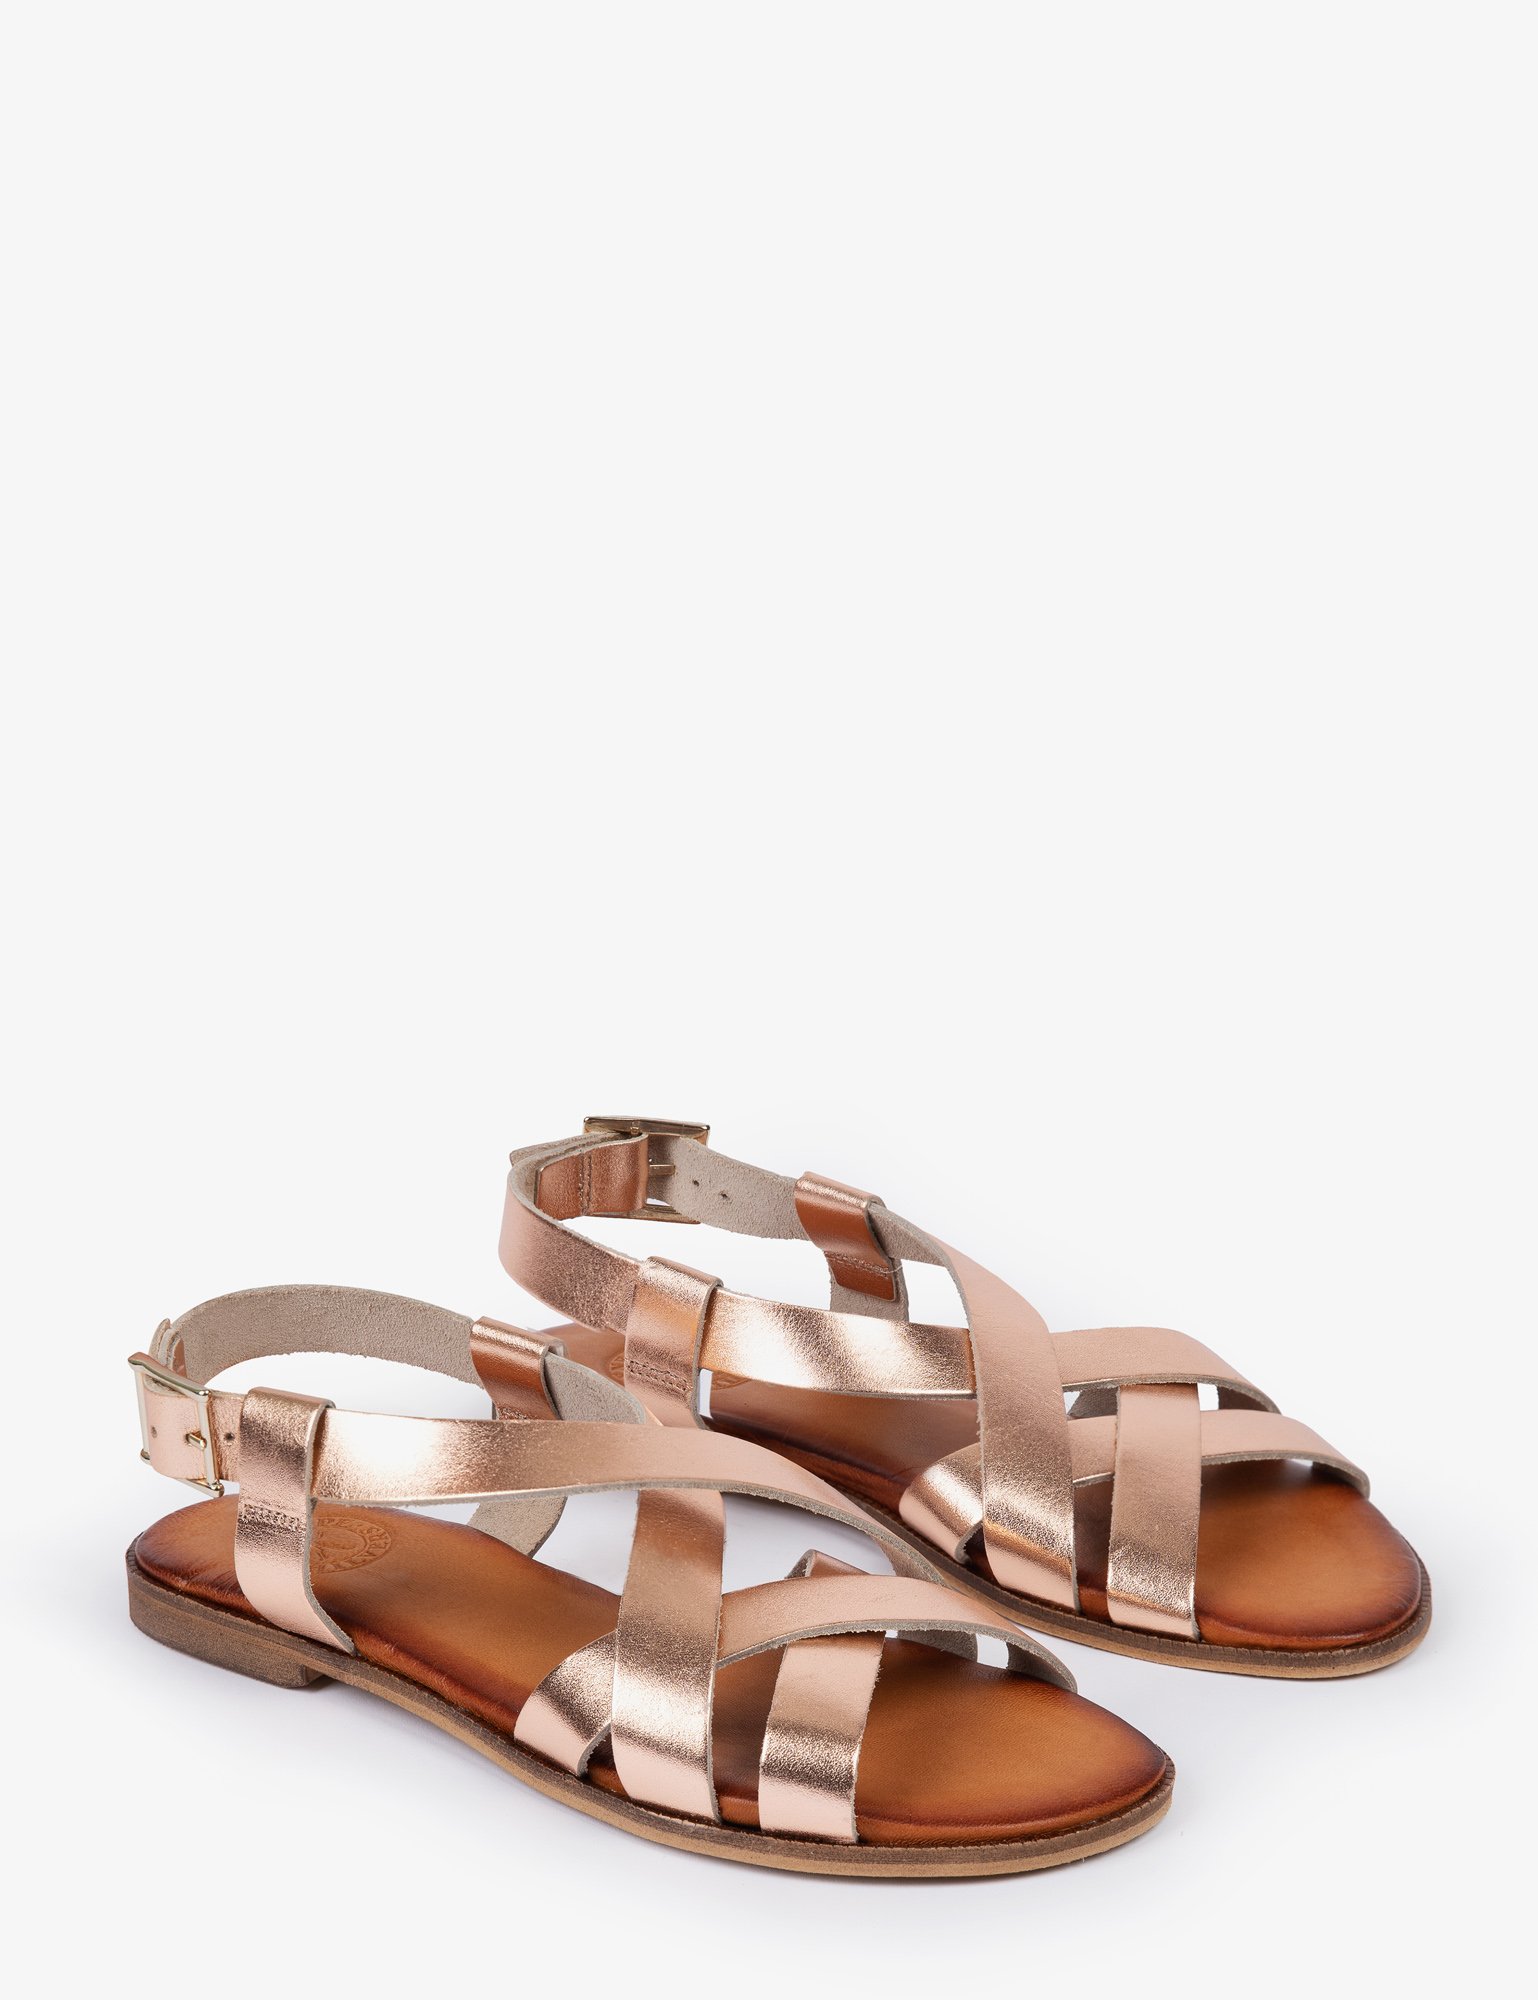 Buttercup Leather Sandal - Rose Gold | Women's Shoes | Penelope Chilvers